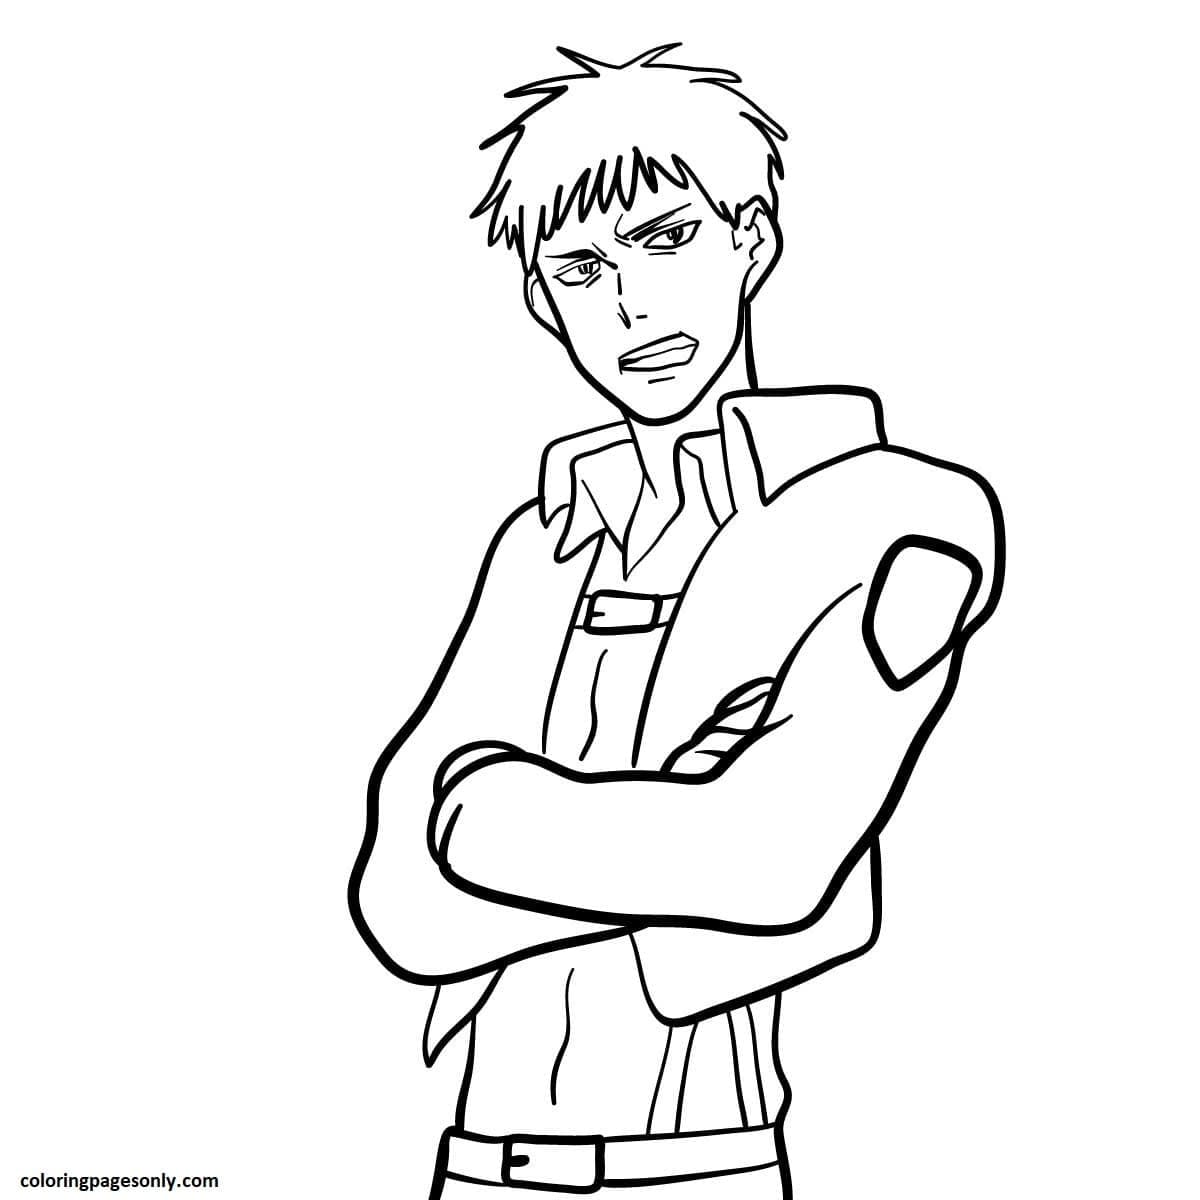 AOT 27 Coloring Pages